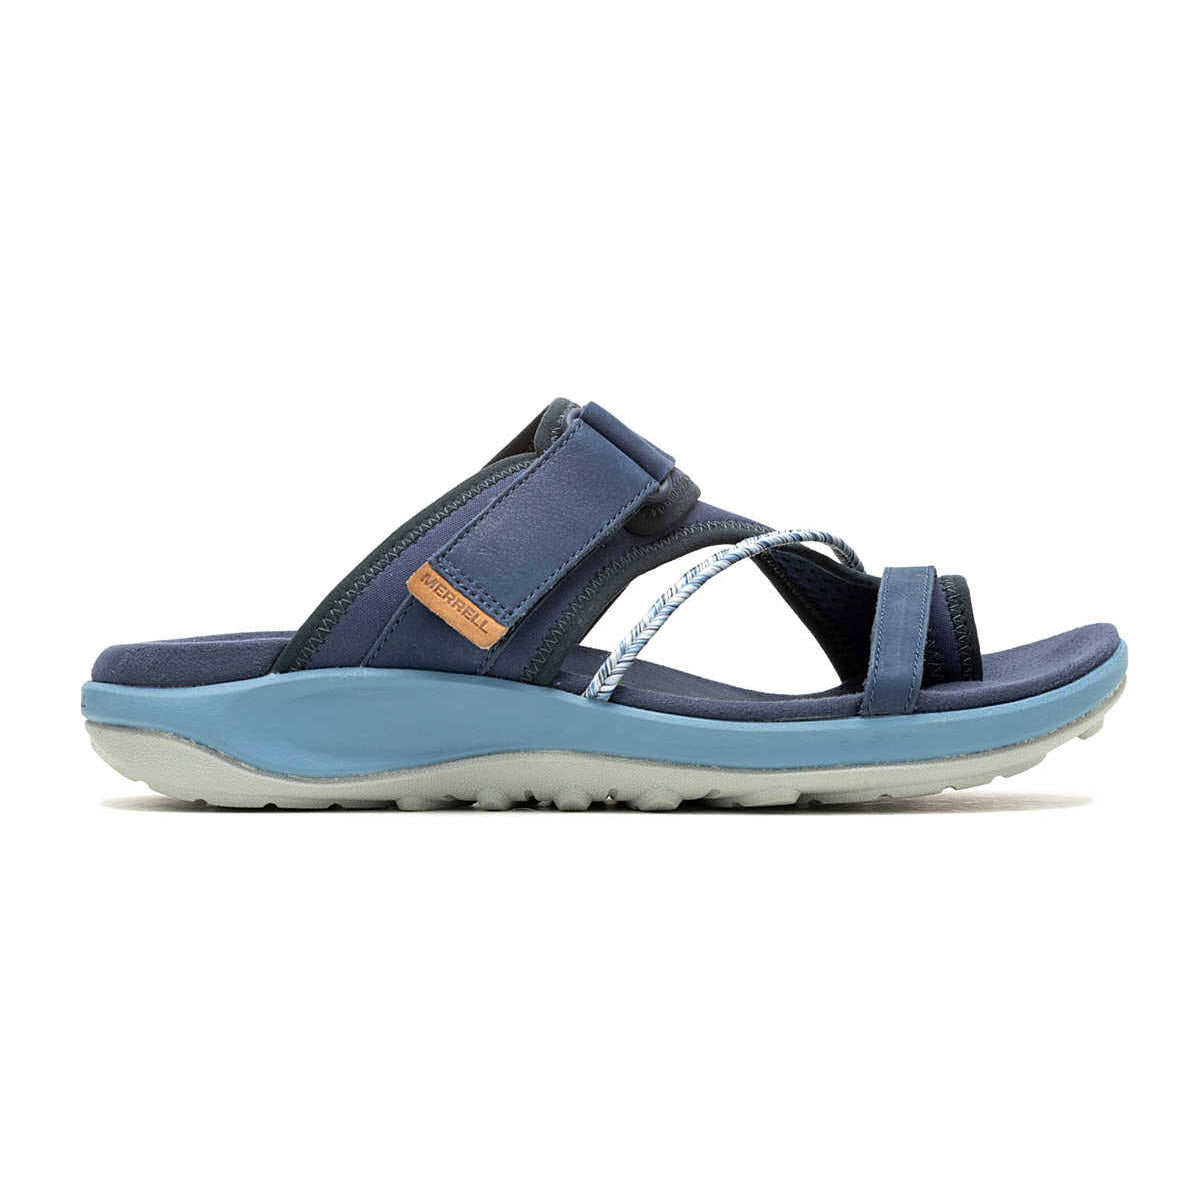 A single blue and gray Merrell Terran 4 Post Sea sport sandal with adjustable straps and a FloatMax™ Foam insole, displayed on a white background.